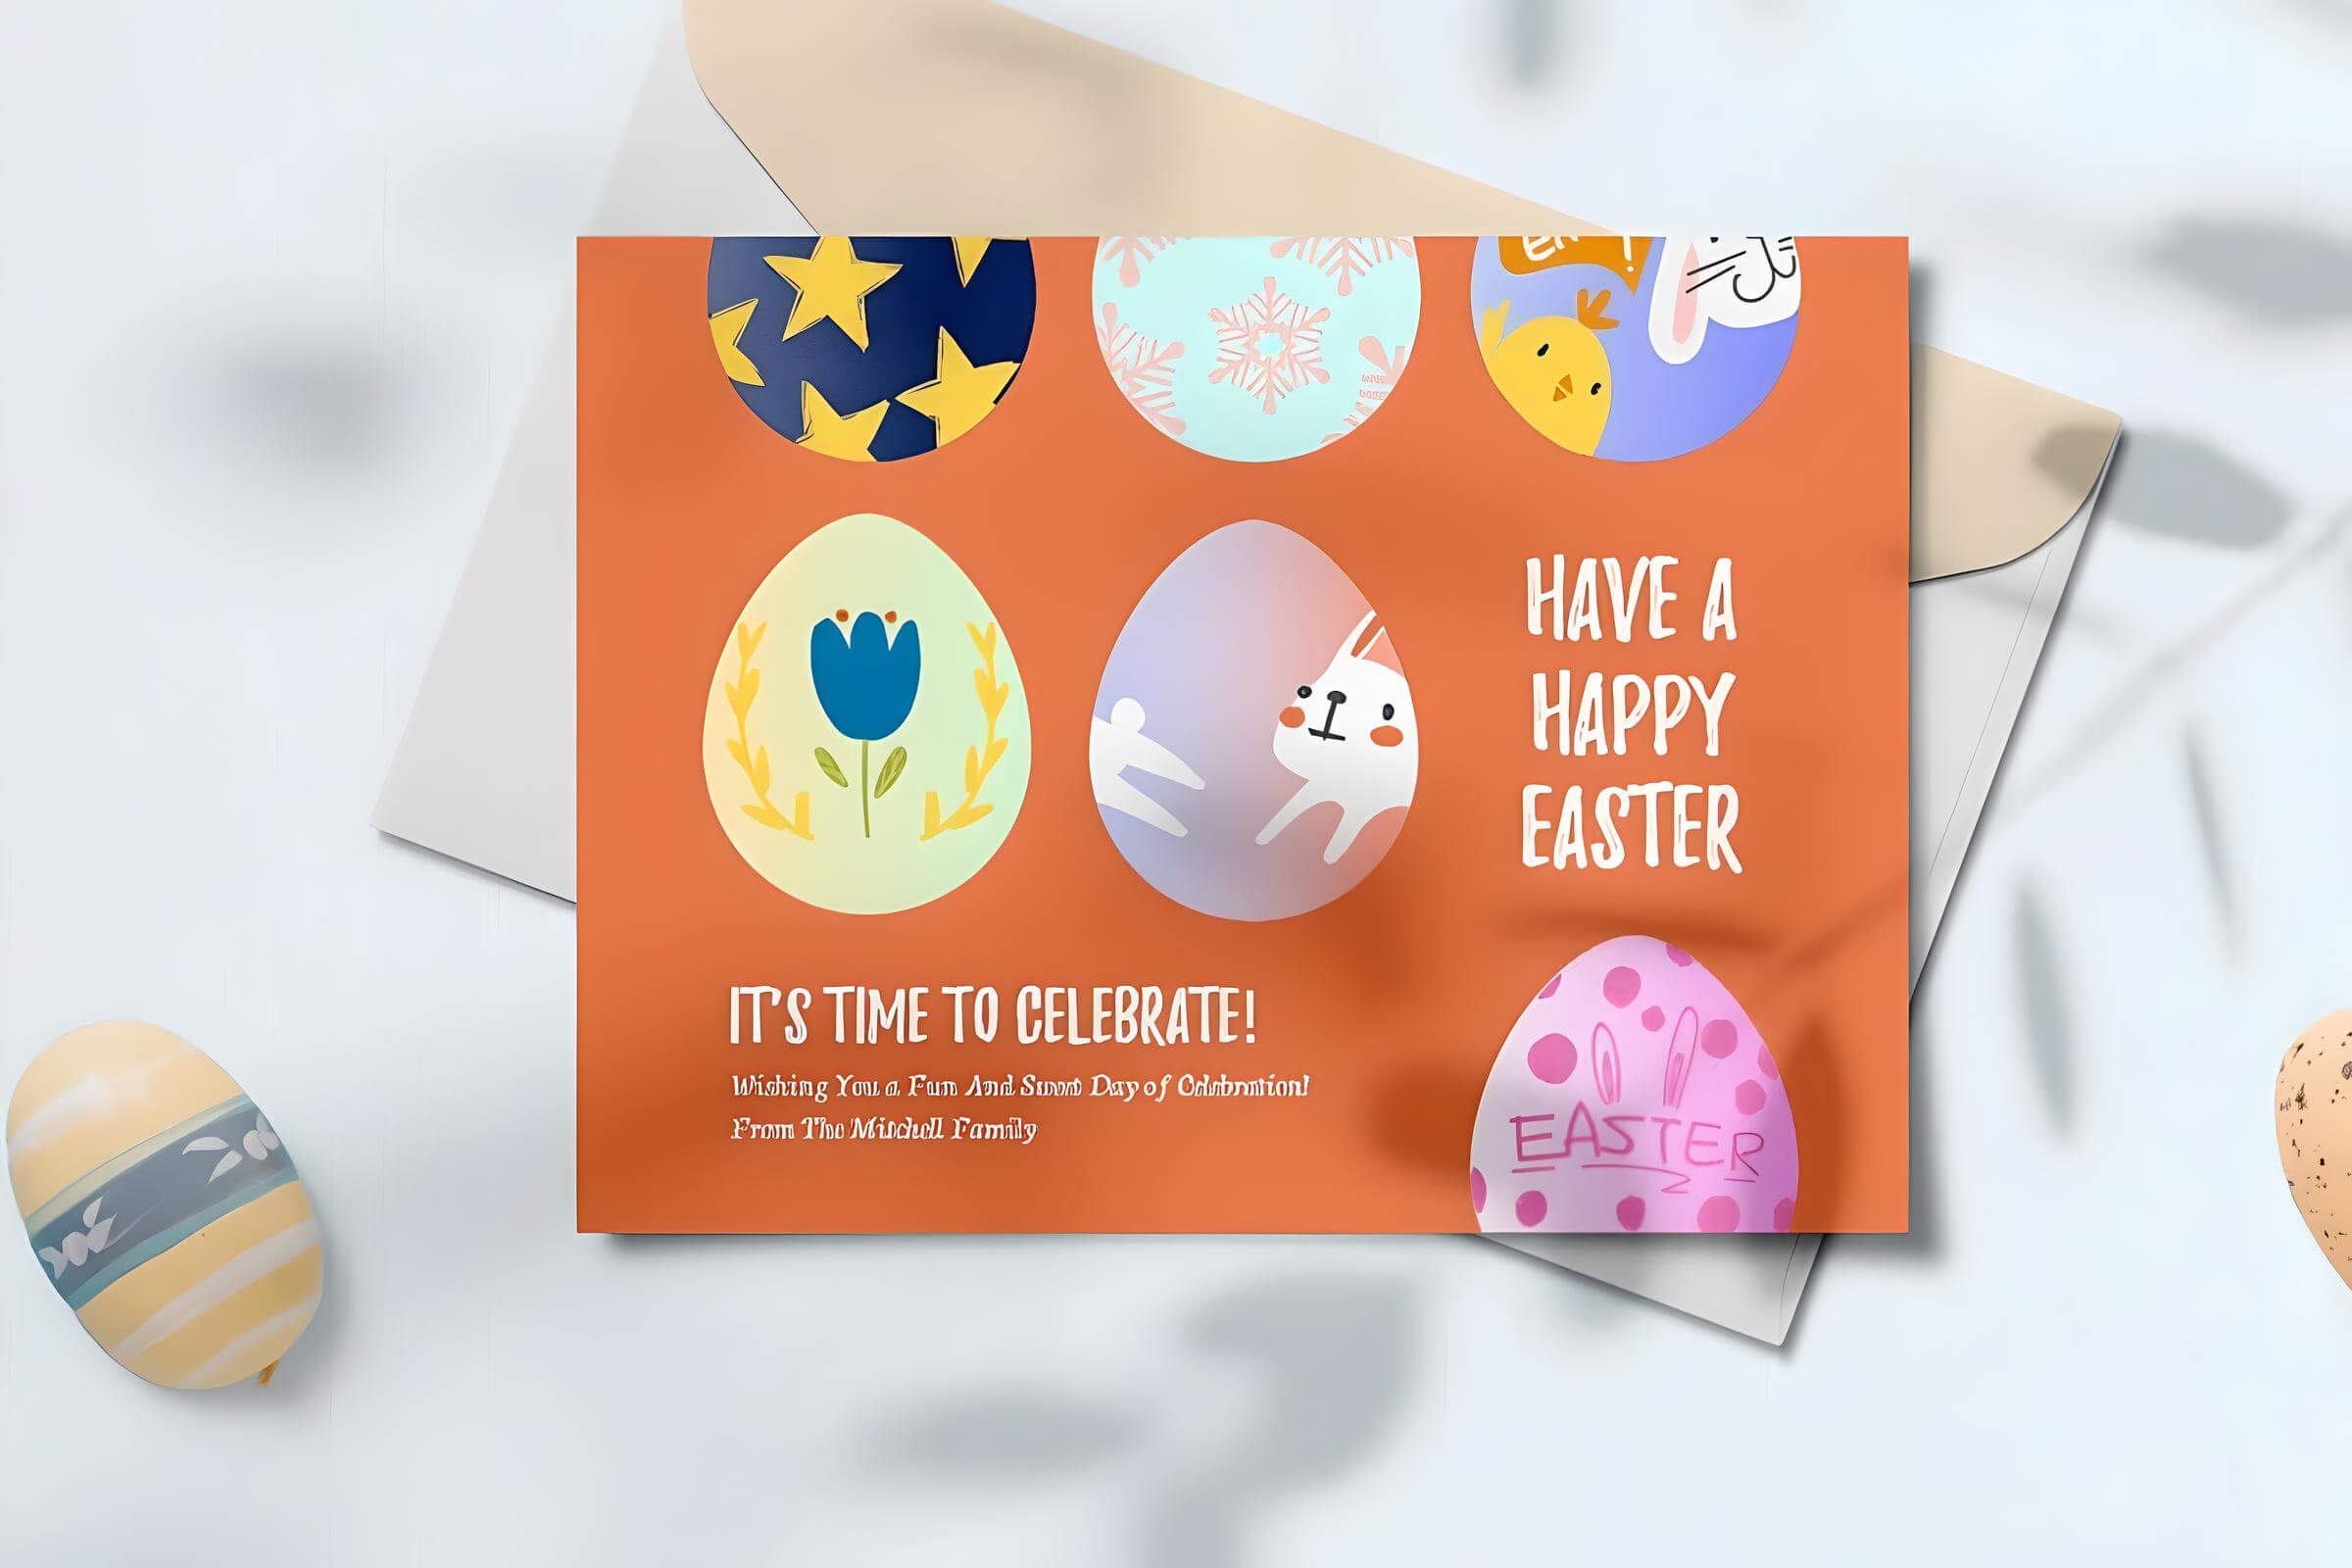 110 Happy Easter Wishes: What to Write in an Easter Card